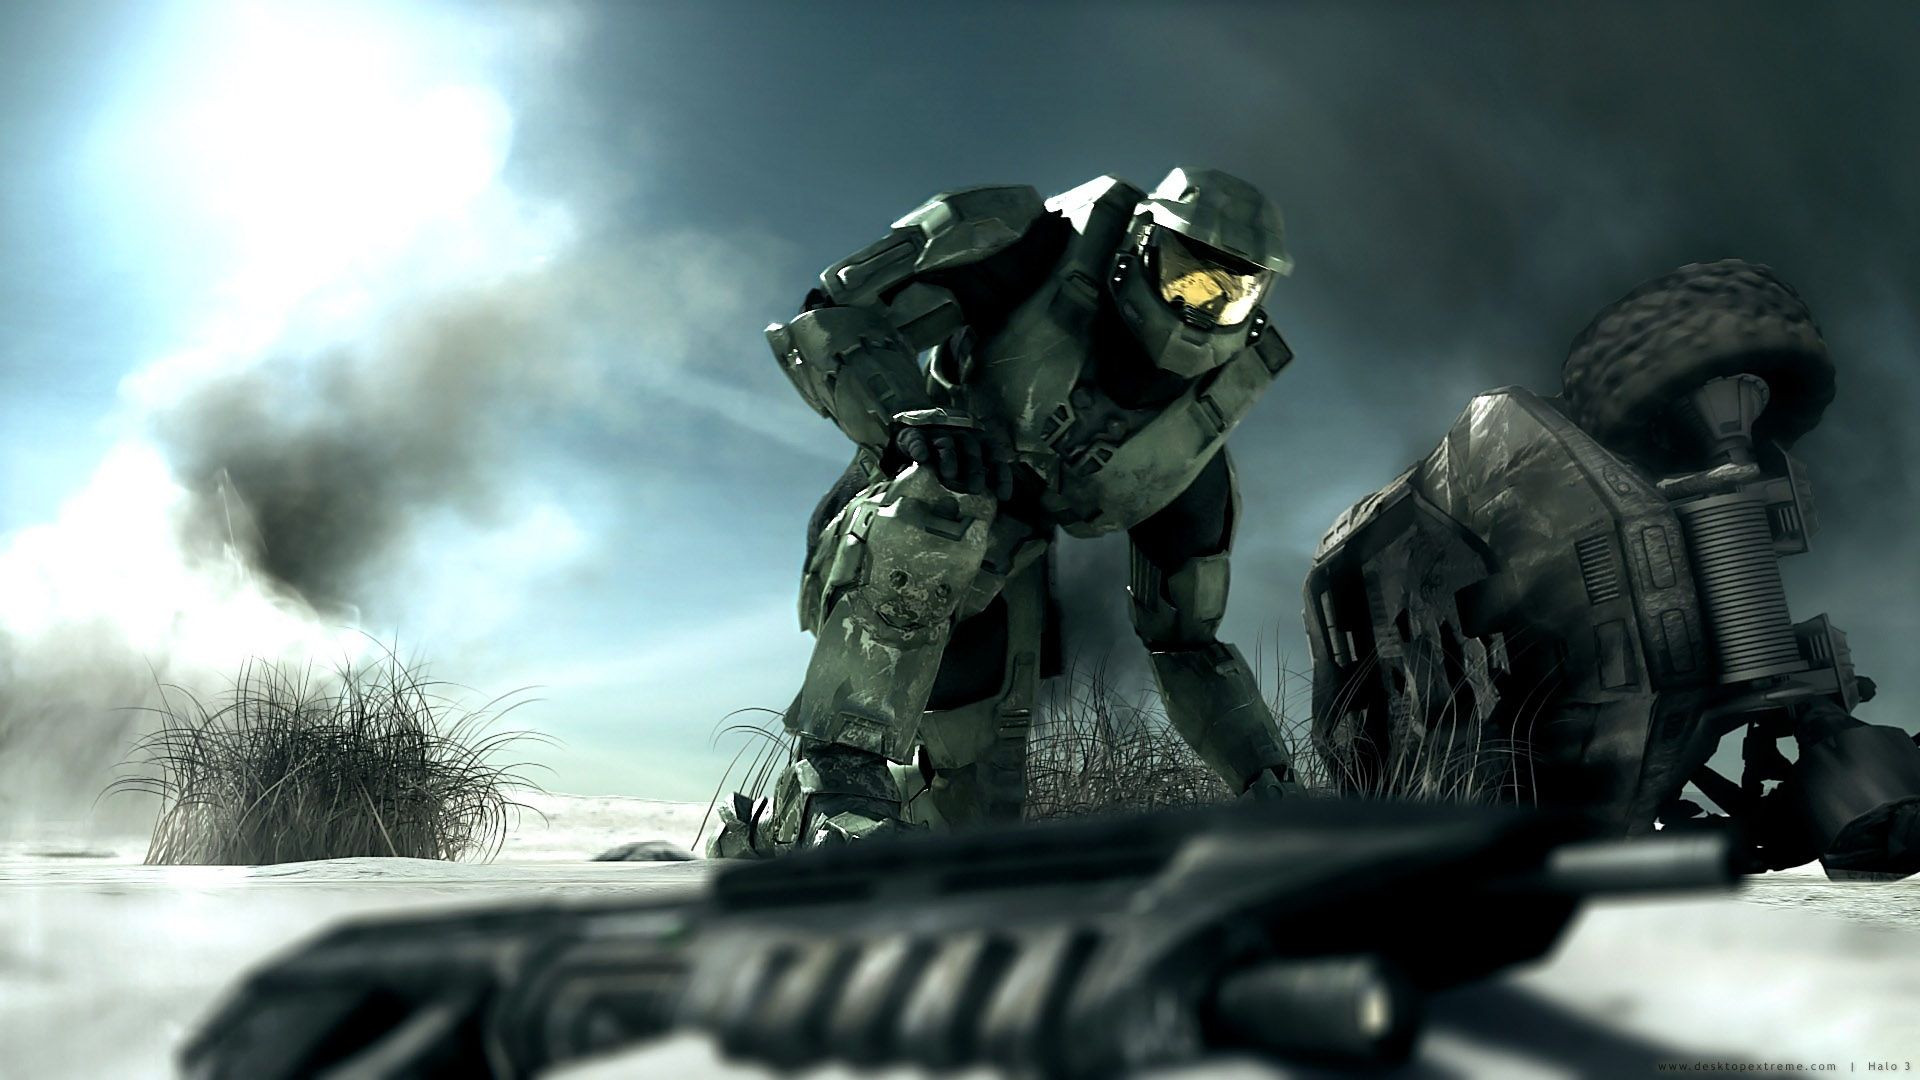 Halo Wallpaper Widescreen Games Background